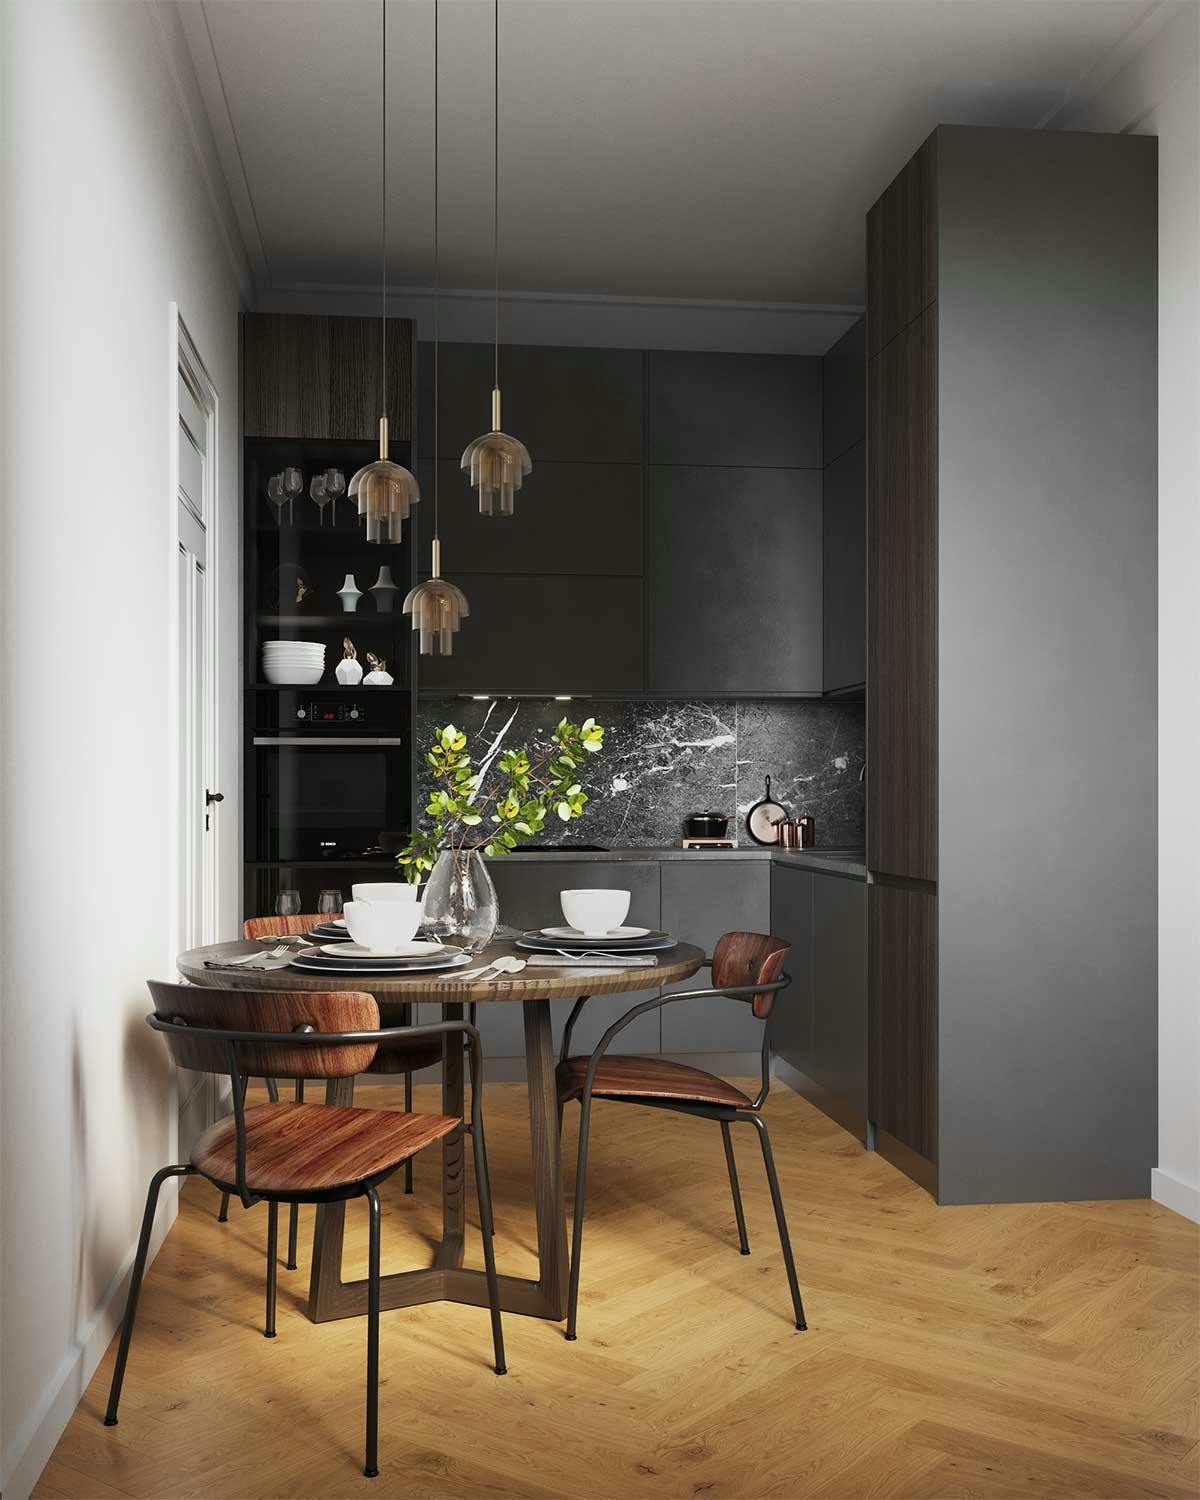 3D Visualization of the interior and product with the interior design concept of a anthracite kitchen in a old building in Köln, Germany.